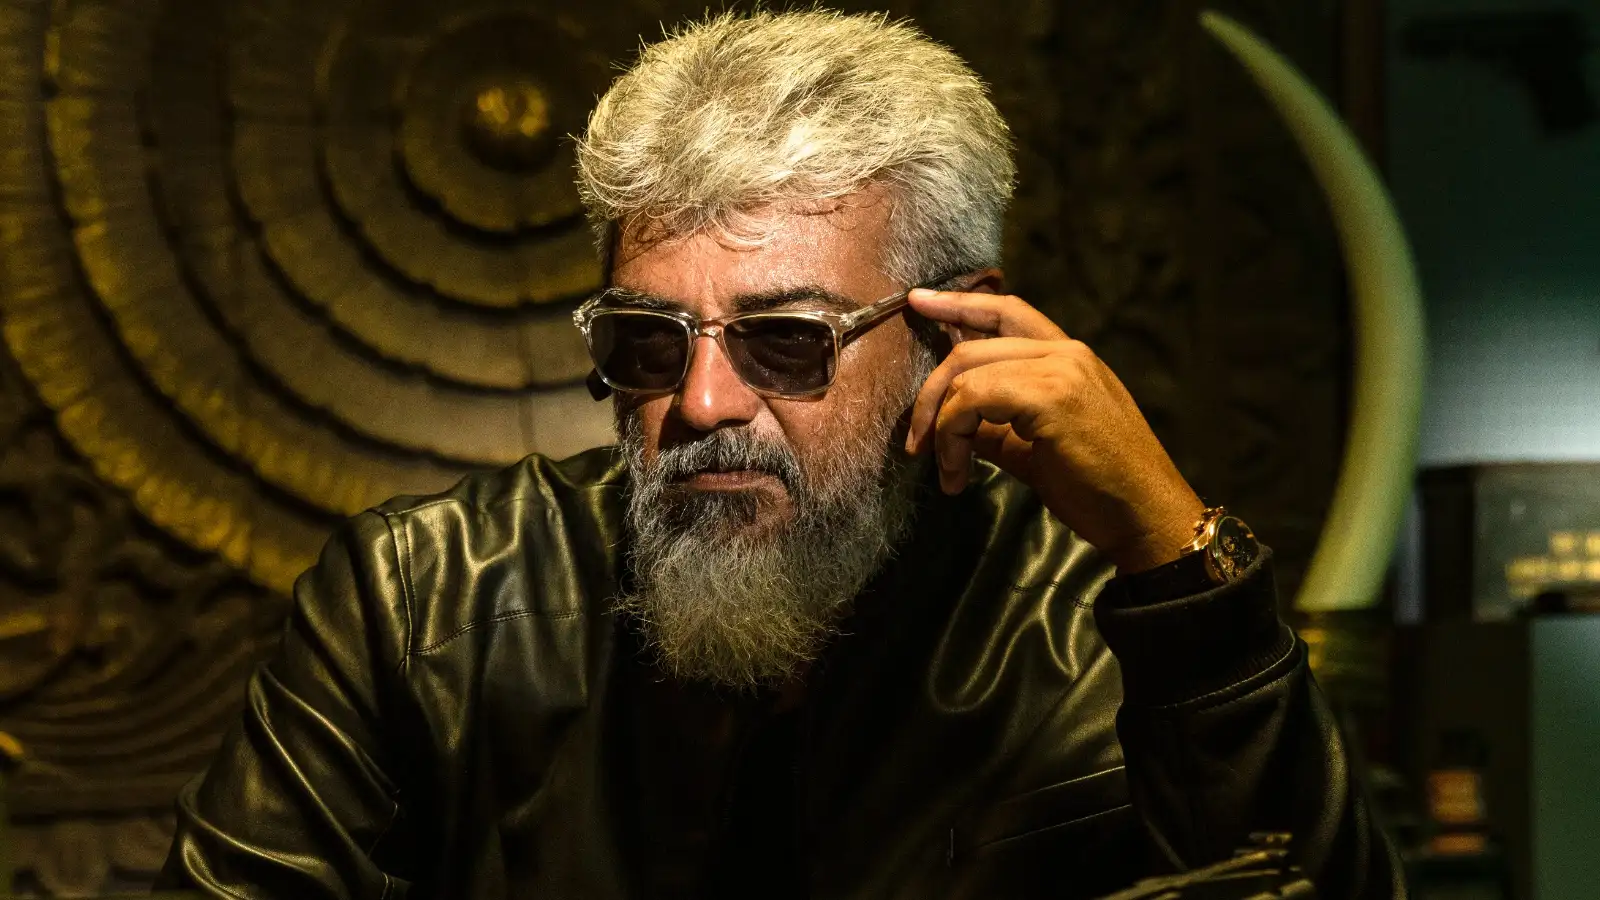 Thunivu Movie Review: This heist action drama is fuelled by Ajith Kumar's  swag and charm | PINKVILLA